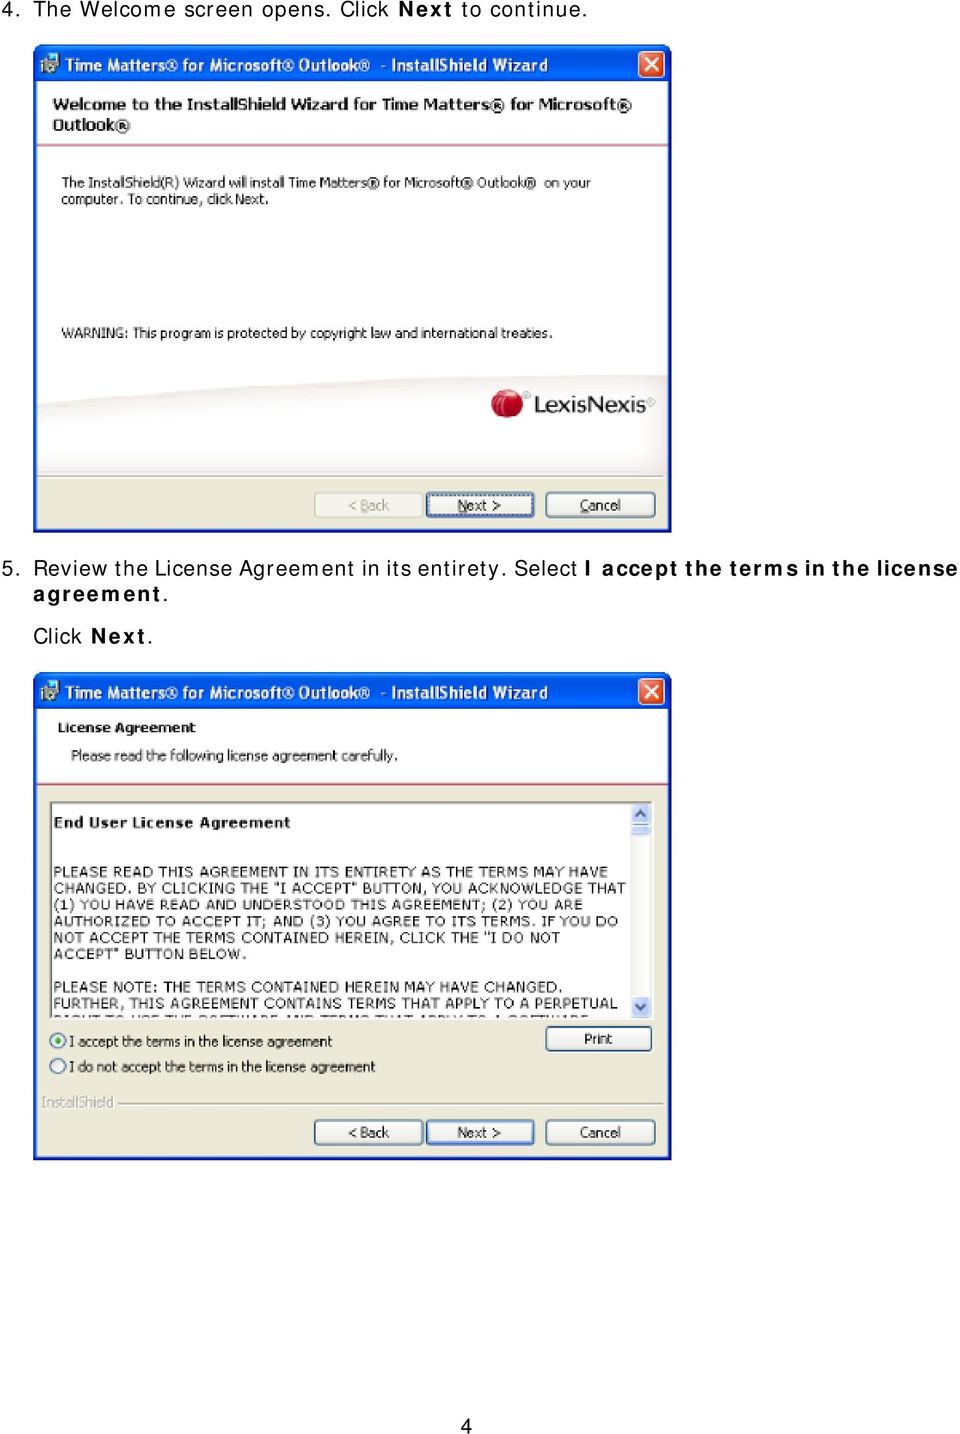 Review the License Agreement in its